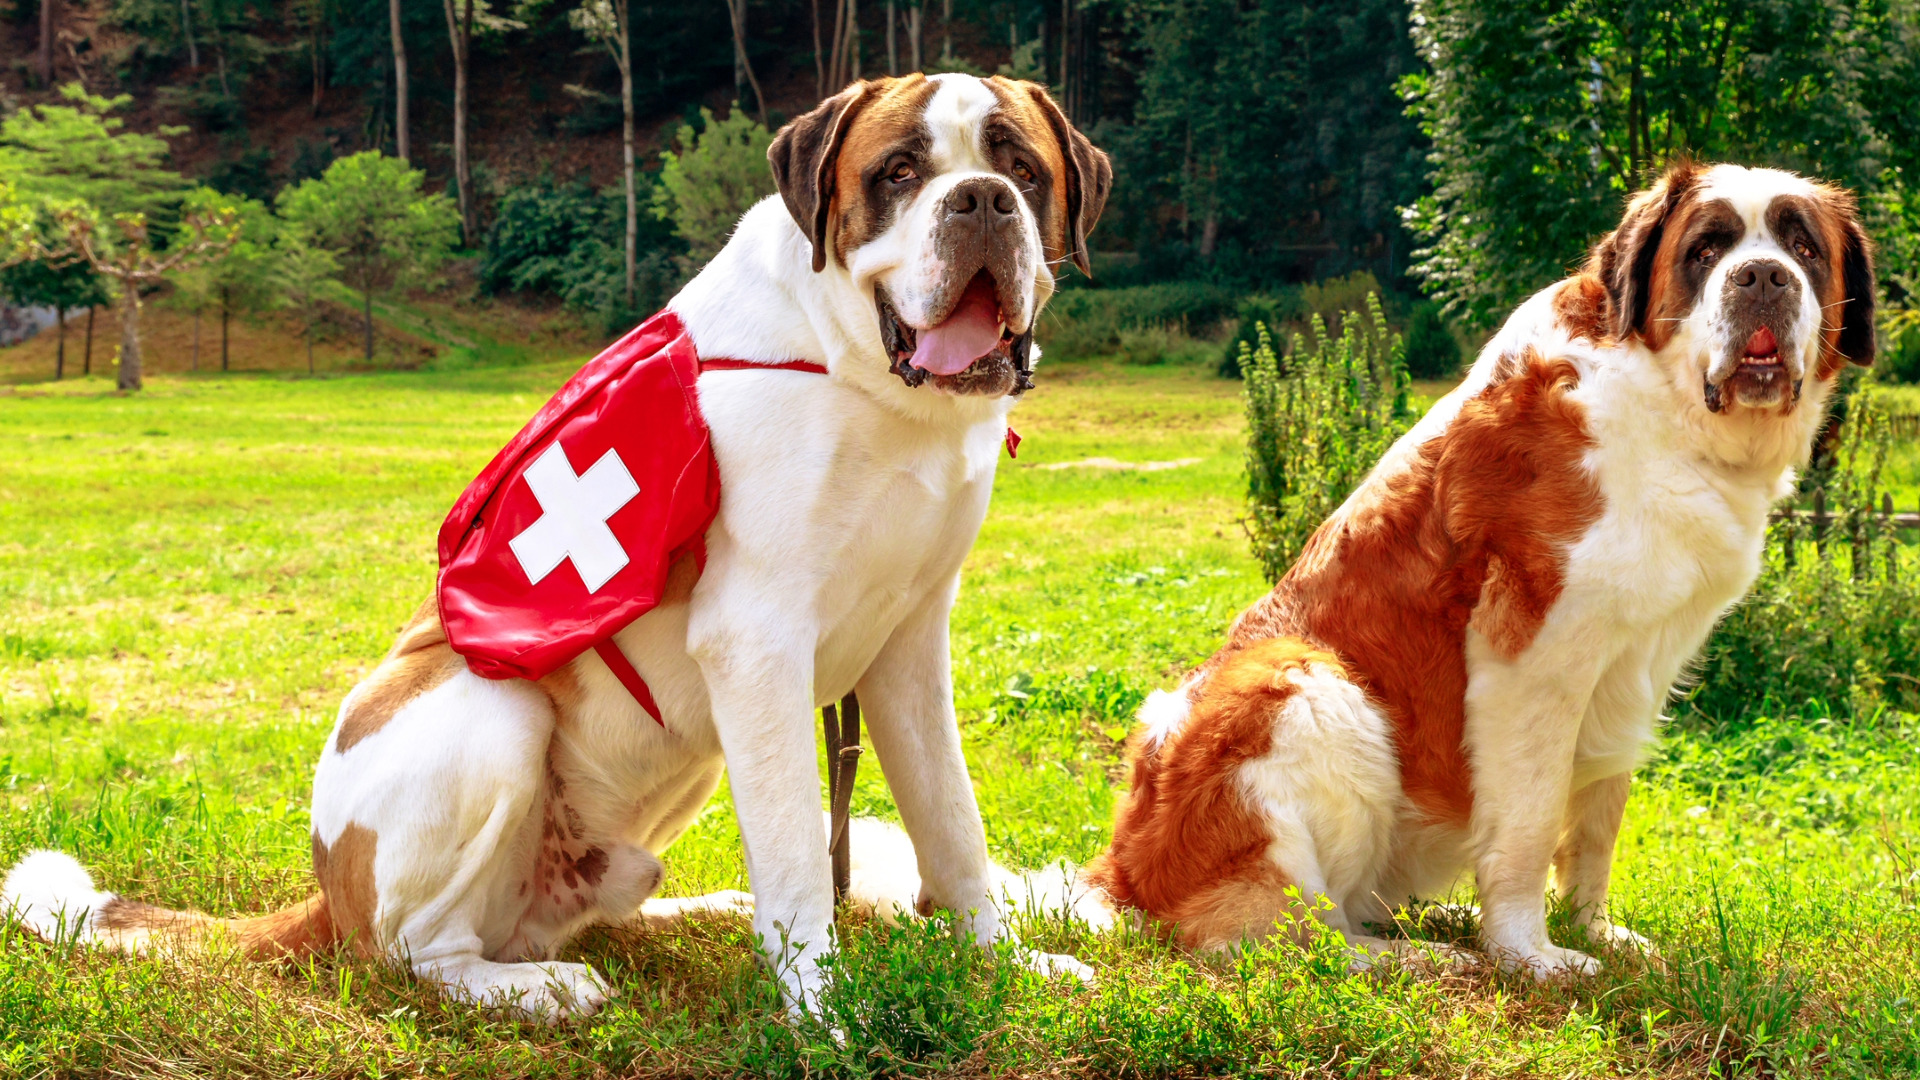 Two Saint Bernards sit next to each other in a park.